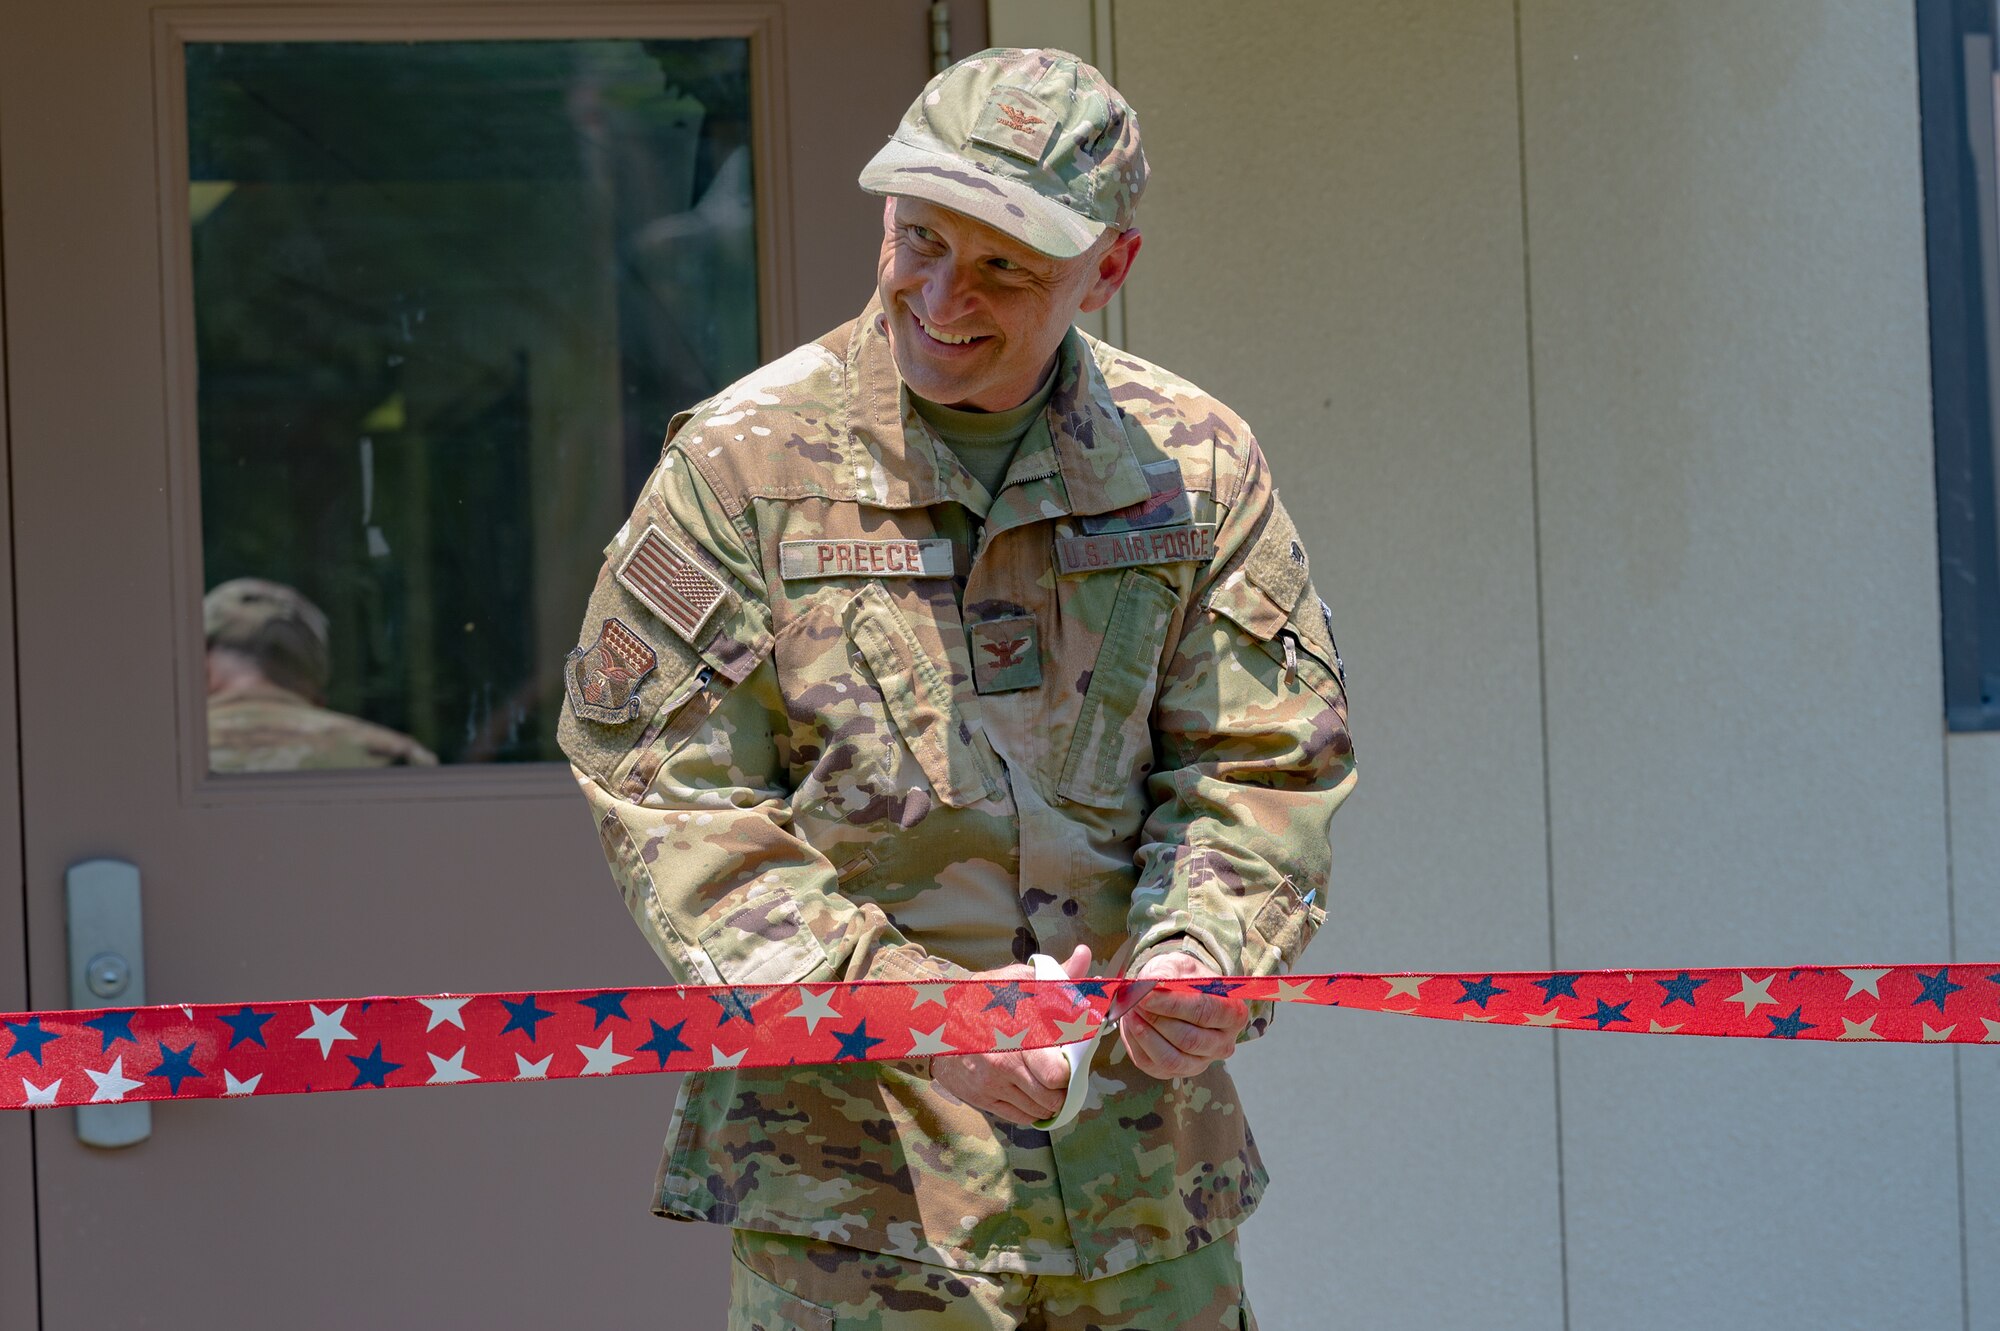 U.S. Air Force Col. Bryan Preece, 130th Airlift Wing Commander, cuts the ribbon to officially open the Airman Readiness Center (ARC) during a ribbon cutting ceremony at McLaughlin Air National Guard Base, Charleston, W.Va., held May 3, 2023. The ARC will house the Director of Psychological Health, the Sexual Assault Response Coordinator, the Wing Chaplain's Office, and the Airman and Family Readiness Program Manager. (U.S. Air National Guard photo by 2nd Lt. De-Juan Haley)